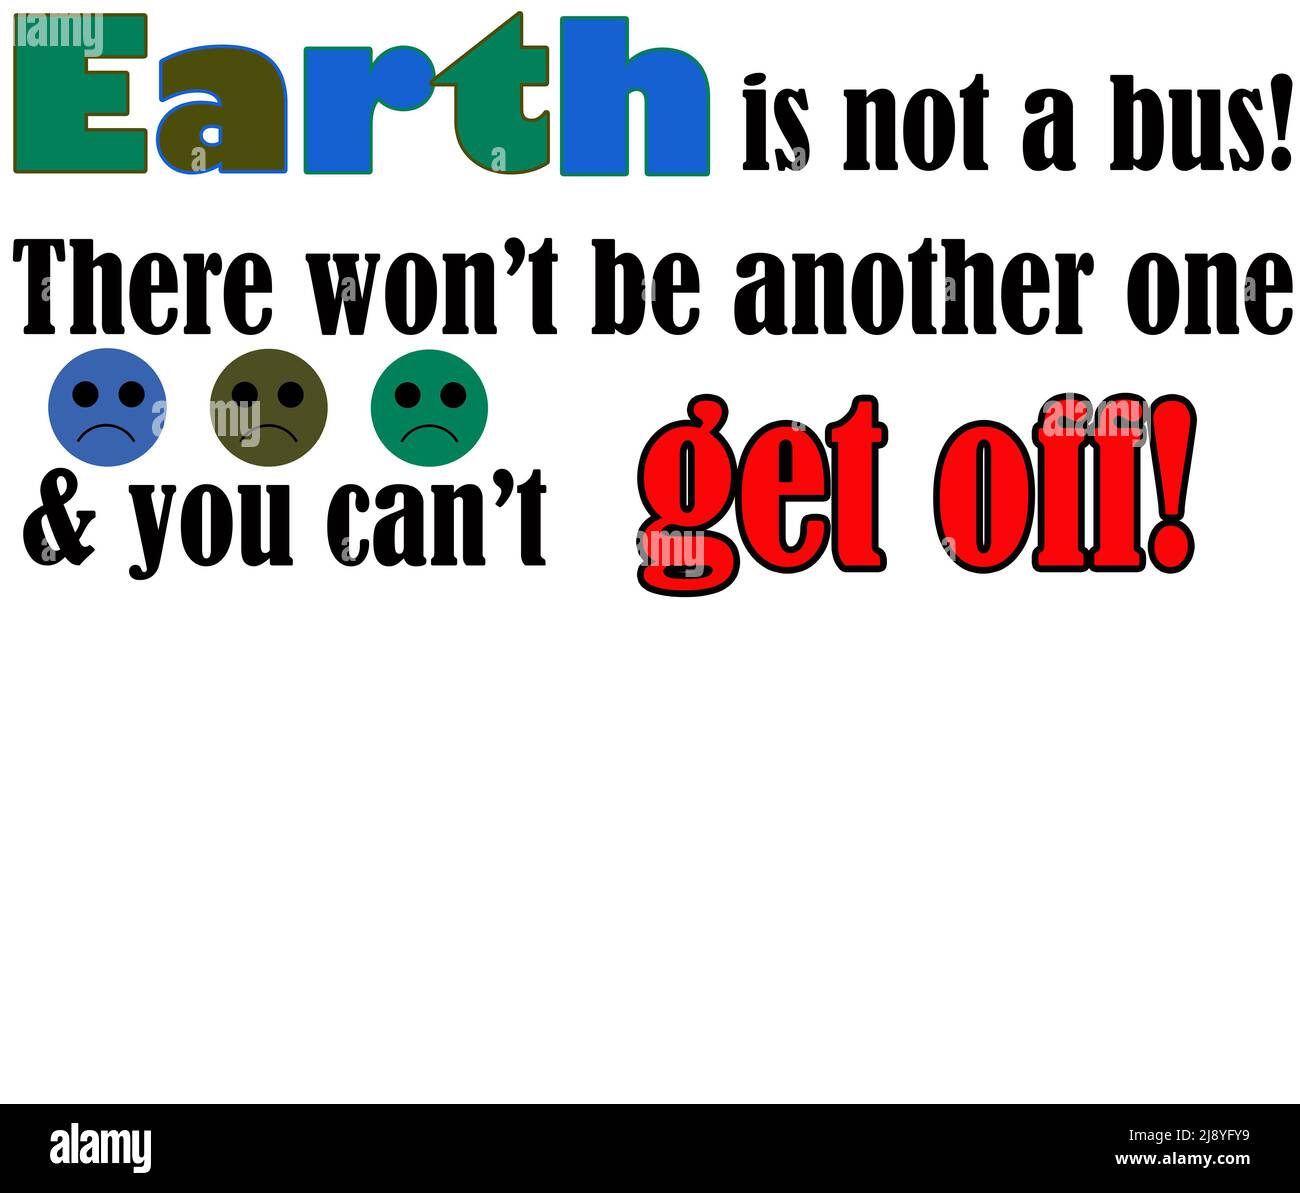 Earth is not a bus! There won't be another one & you can't get off! - Slogan / Illustration. Stock Photo